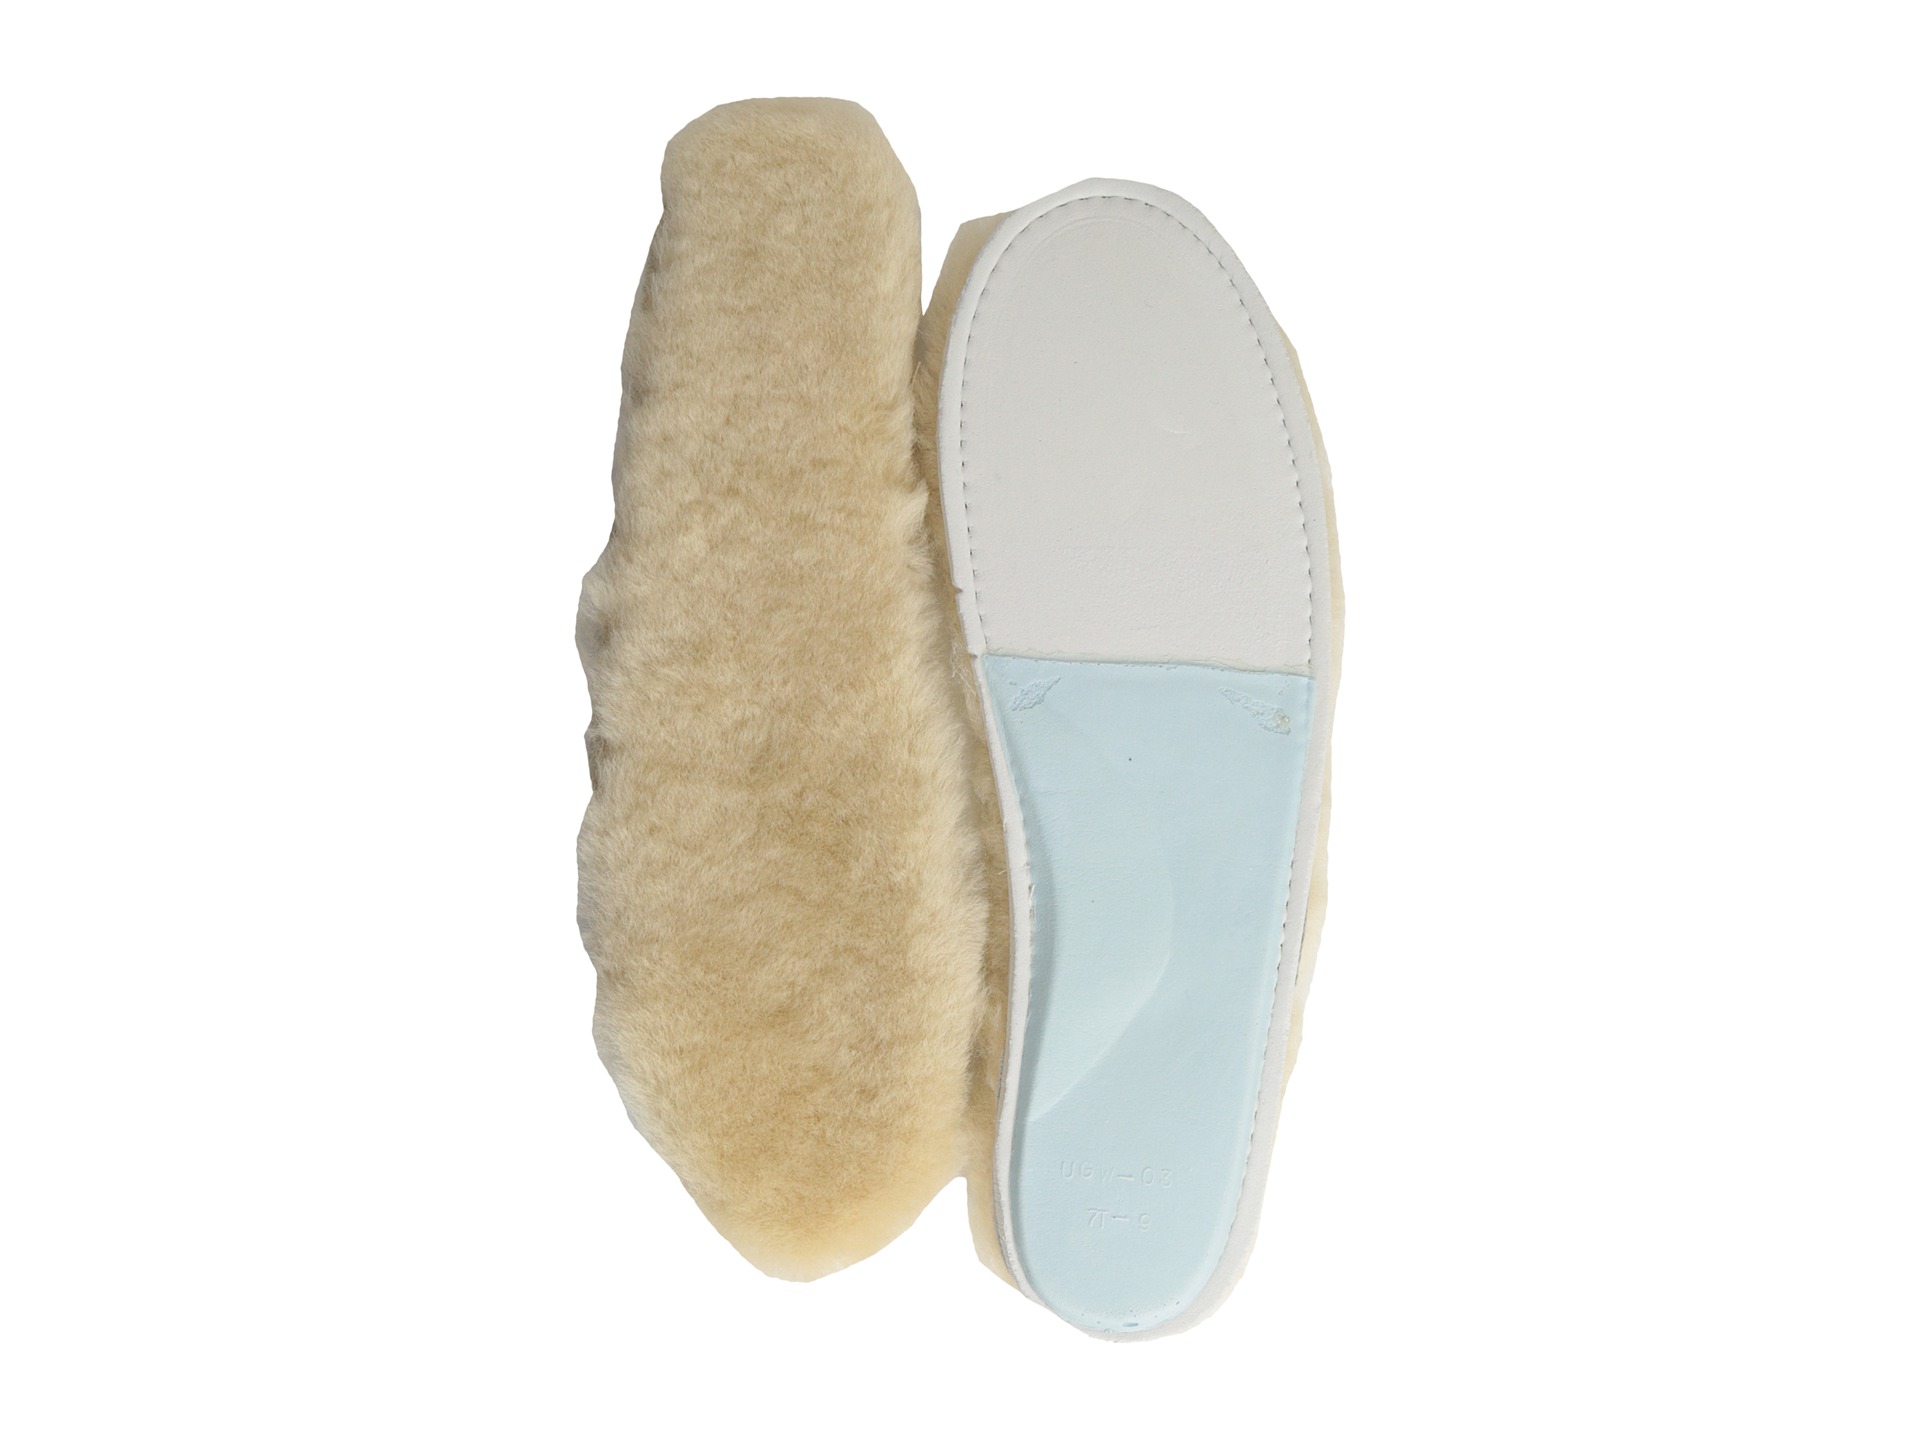 slippers  Ugg Slipper for ugg Insole Replacements inserts